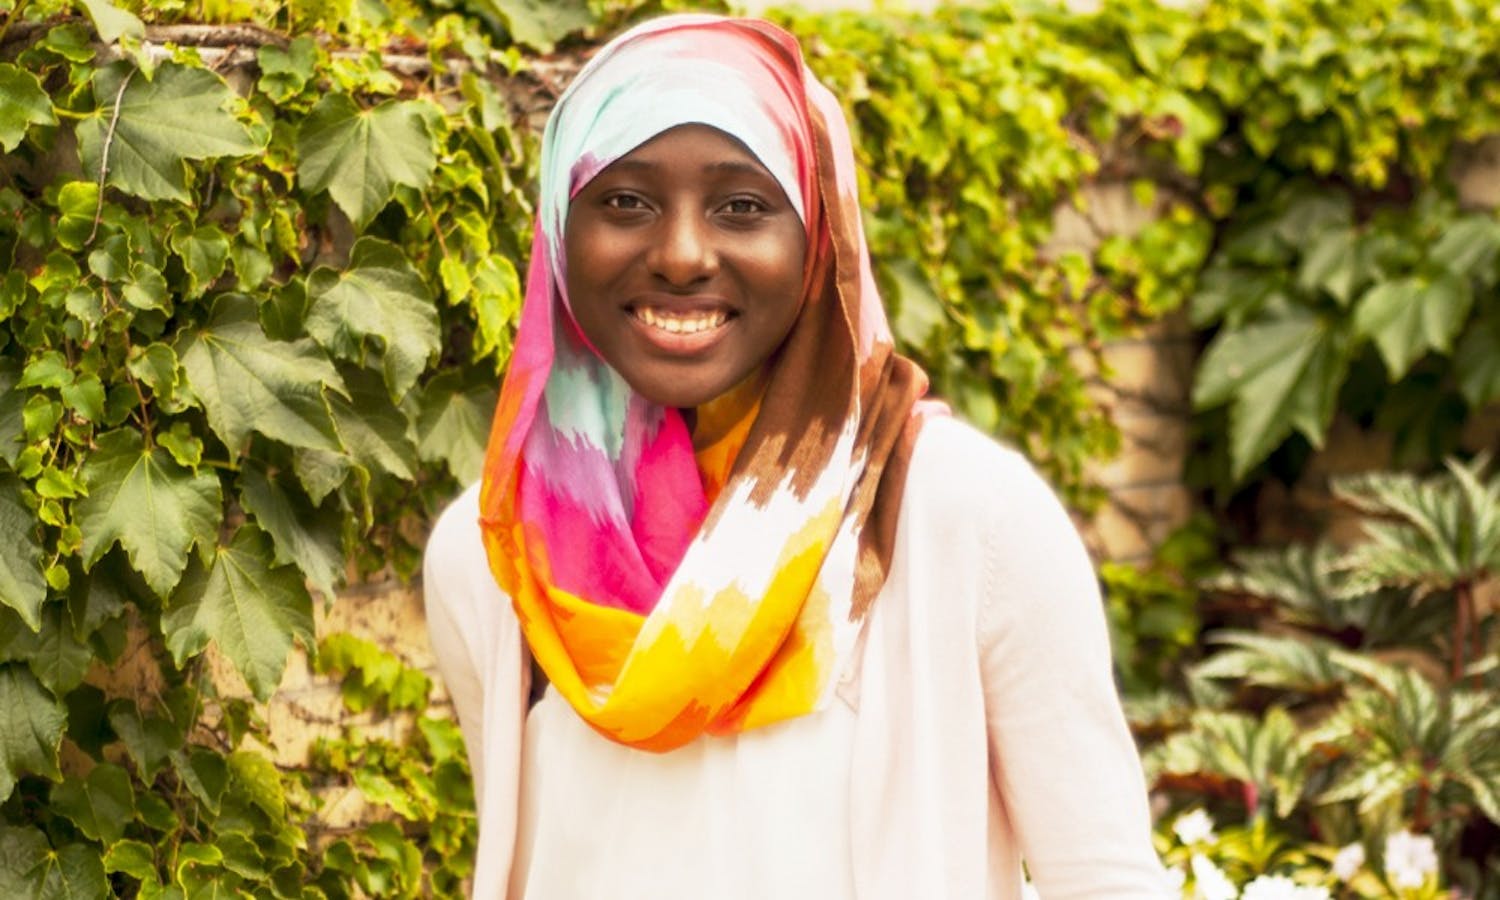 Fatoumata Ceesay is a freshman at UW-Madison, learning about her identity through multicultural experiences.&nbsp;